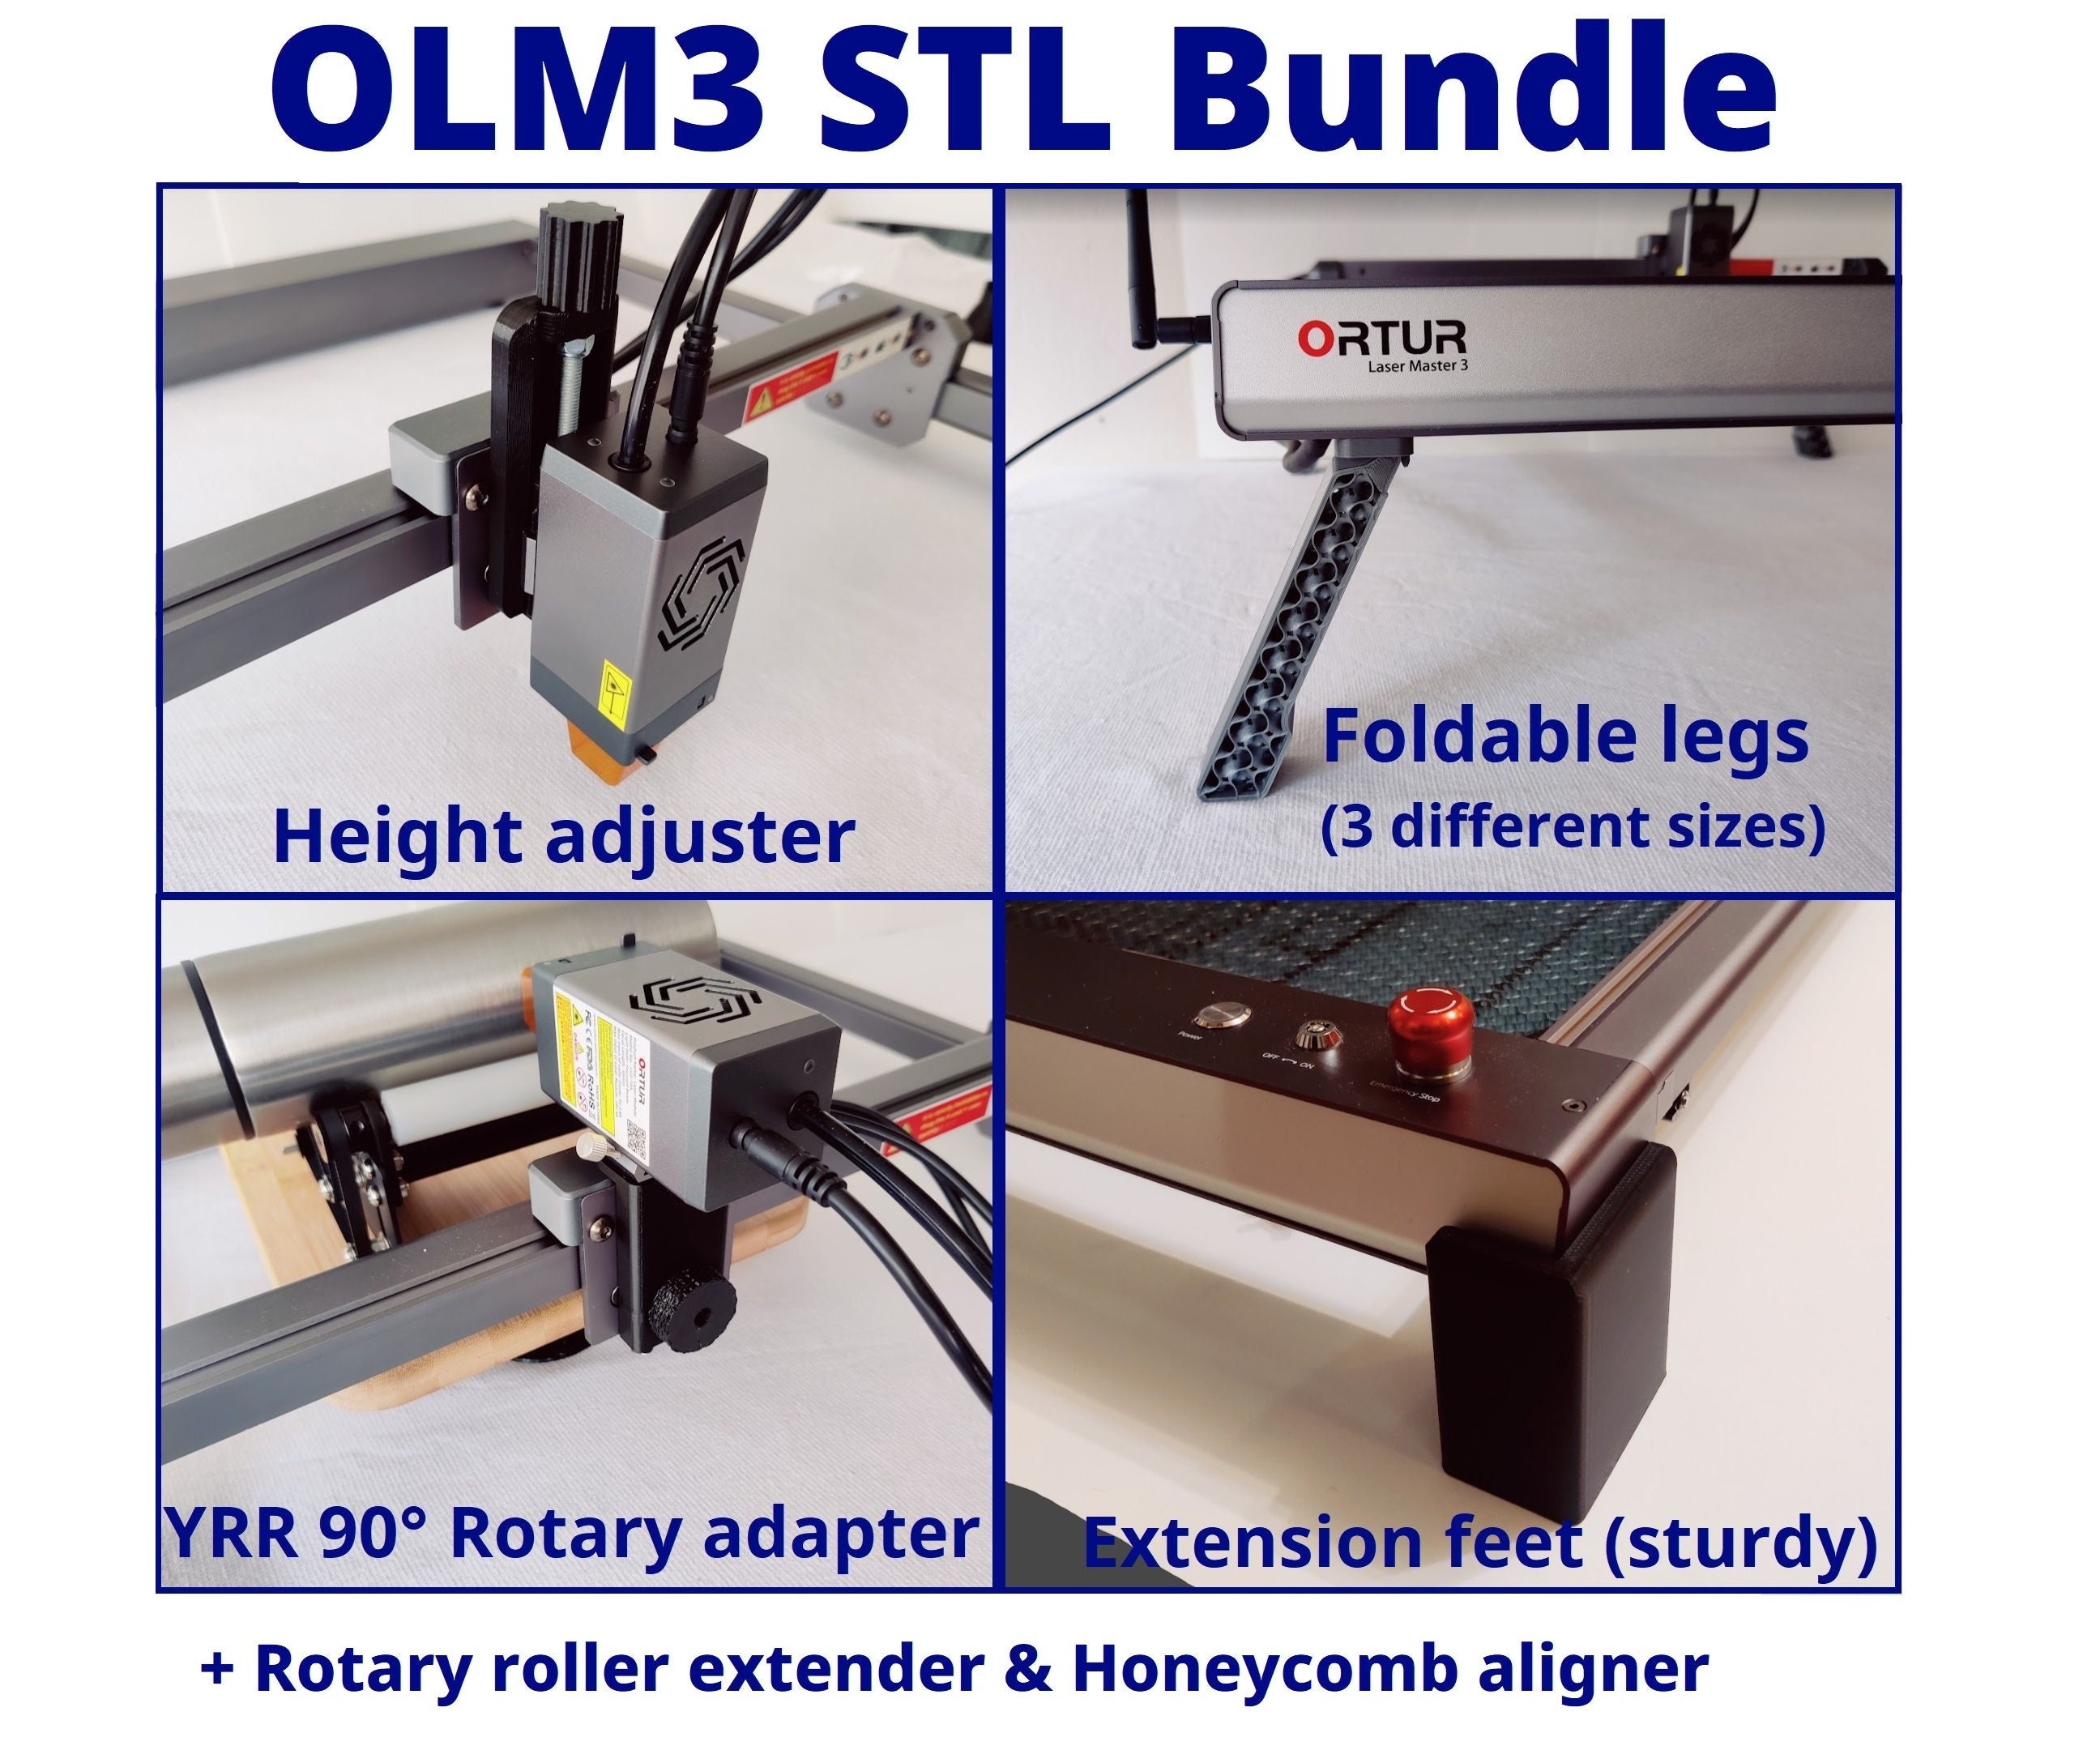 ORTUR Laser Master 3 Laser Engraver 10W with Foldable Feet +Y-axis